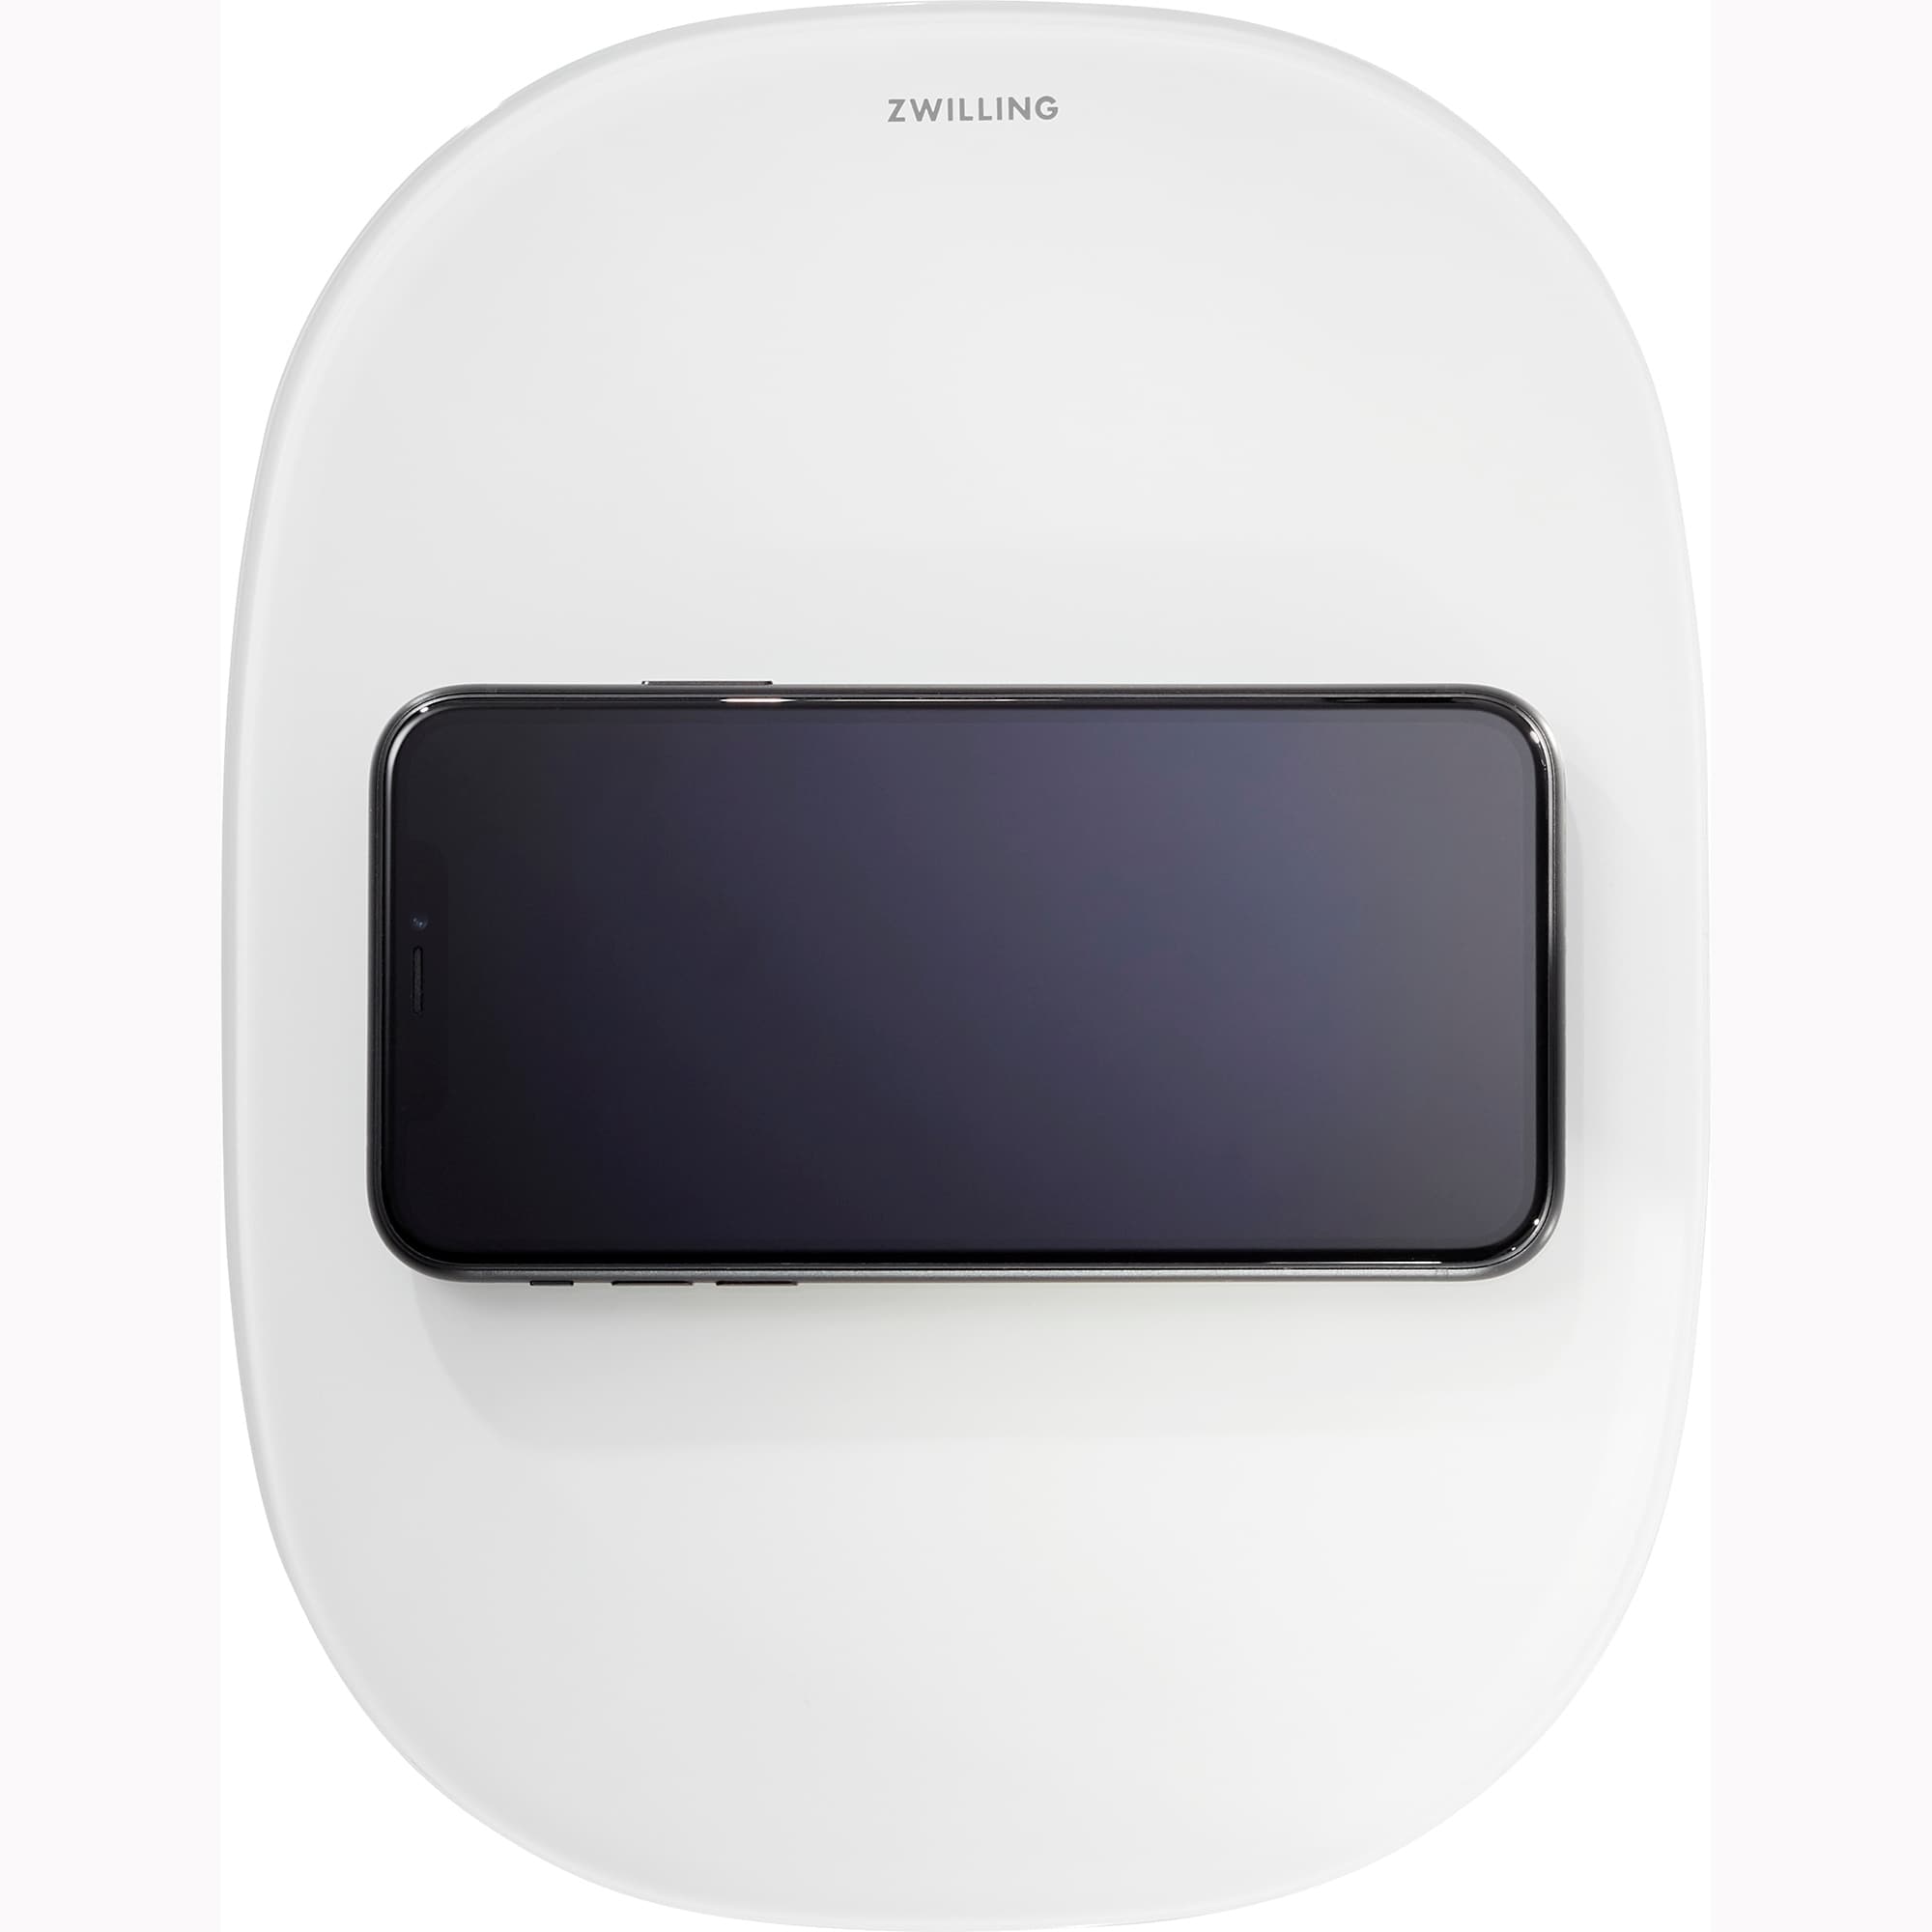 Zwilling Enfinigy Wireless Charging Scale - Black